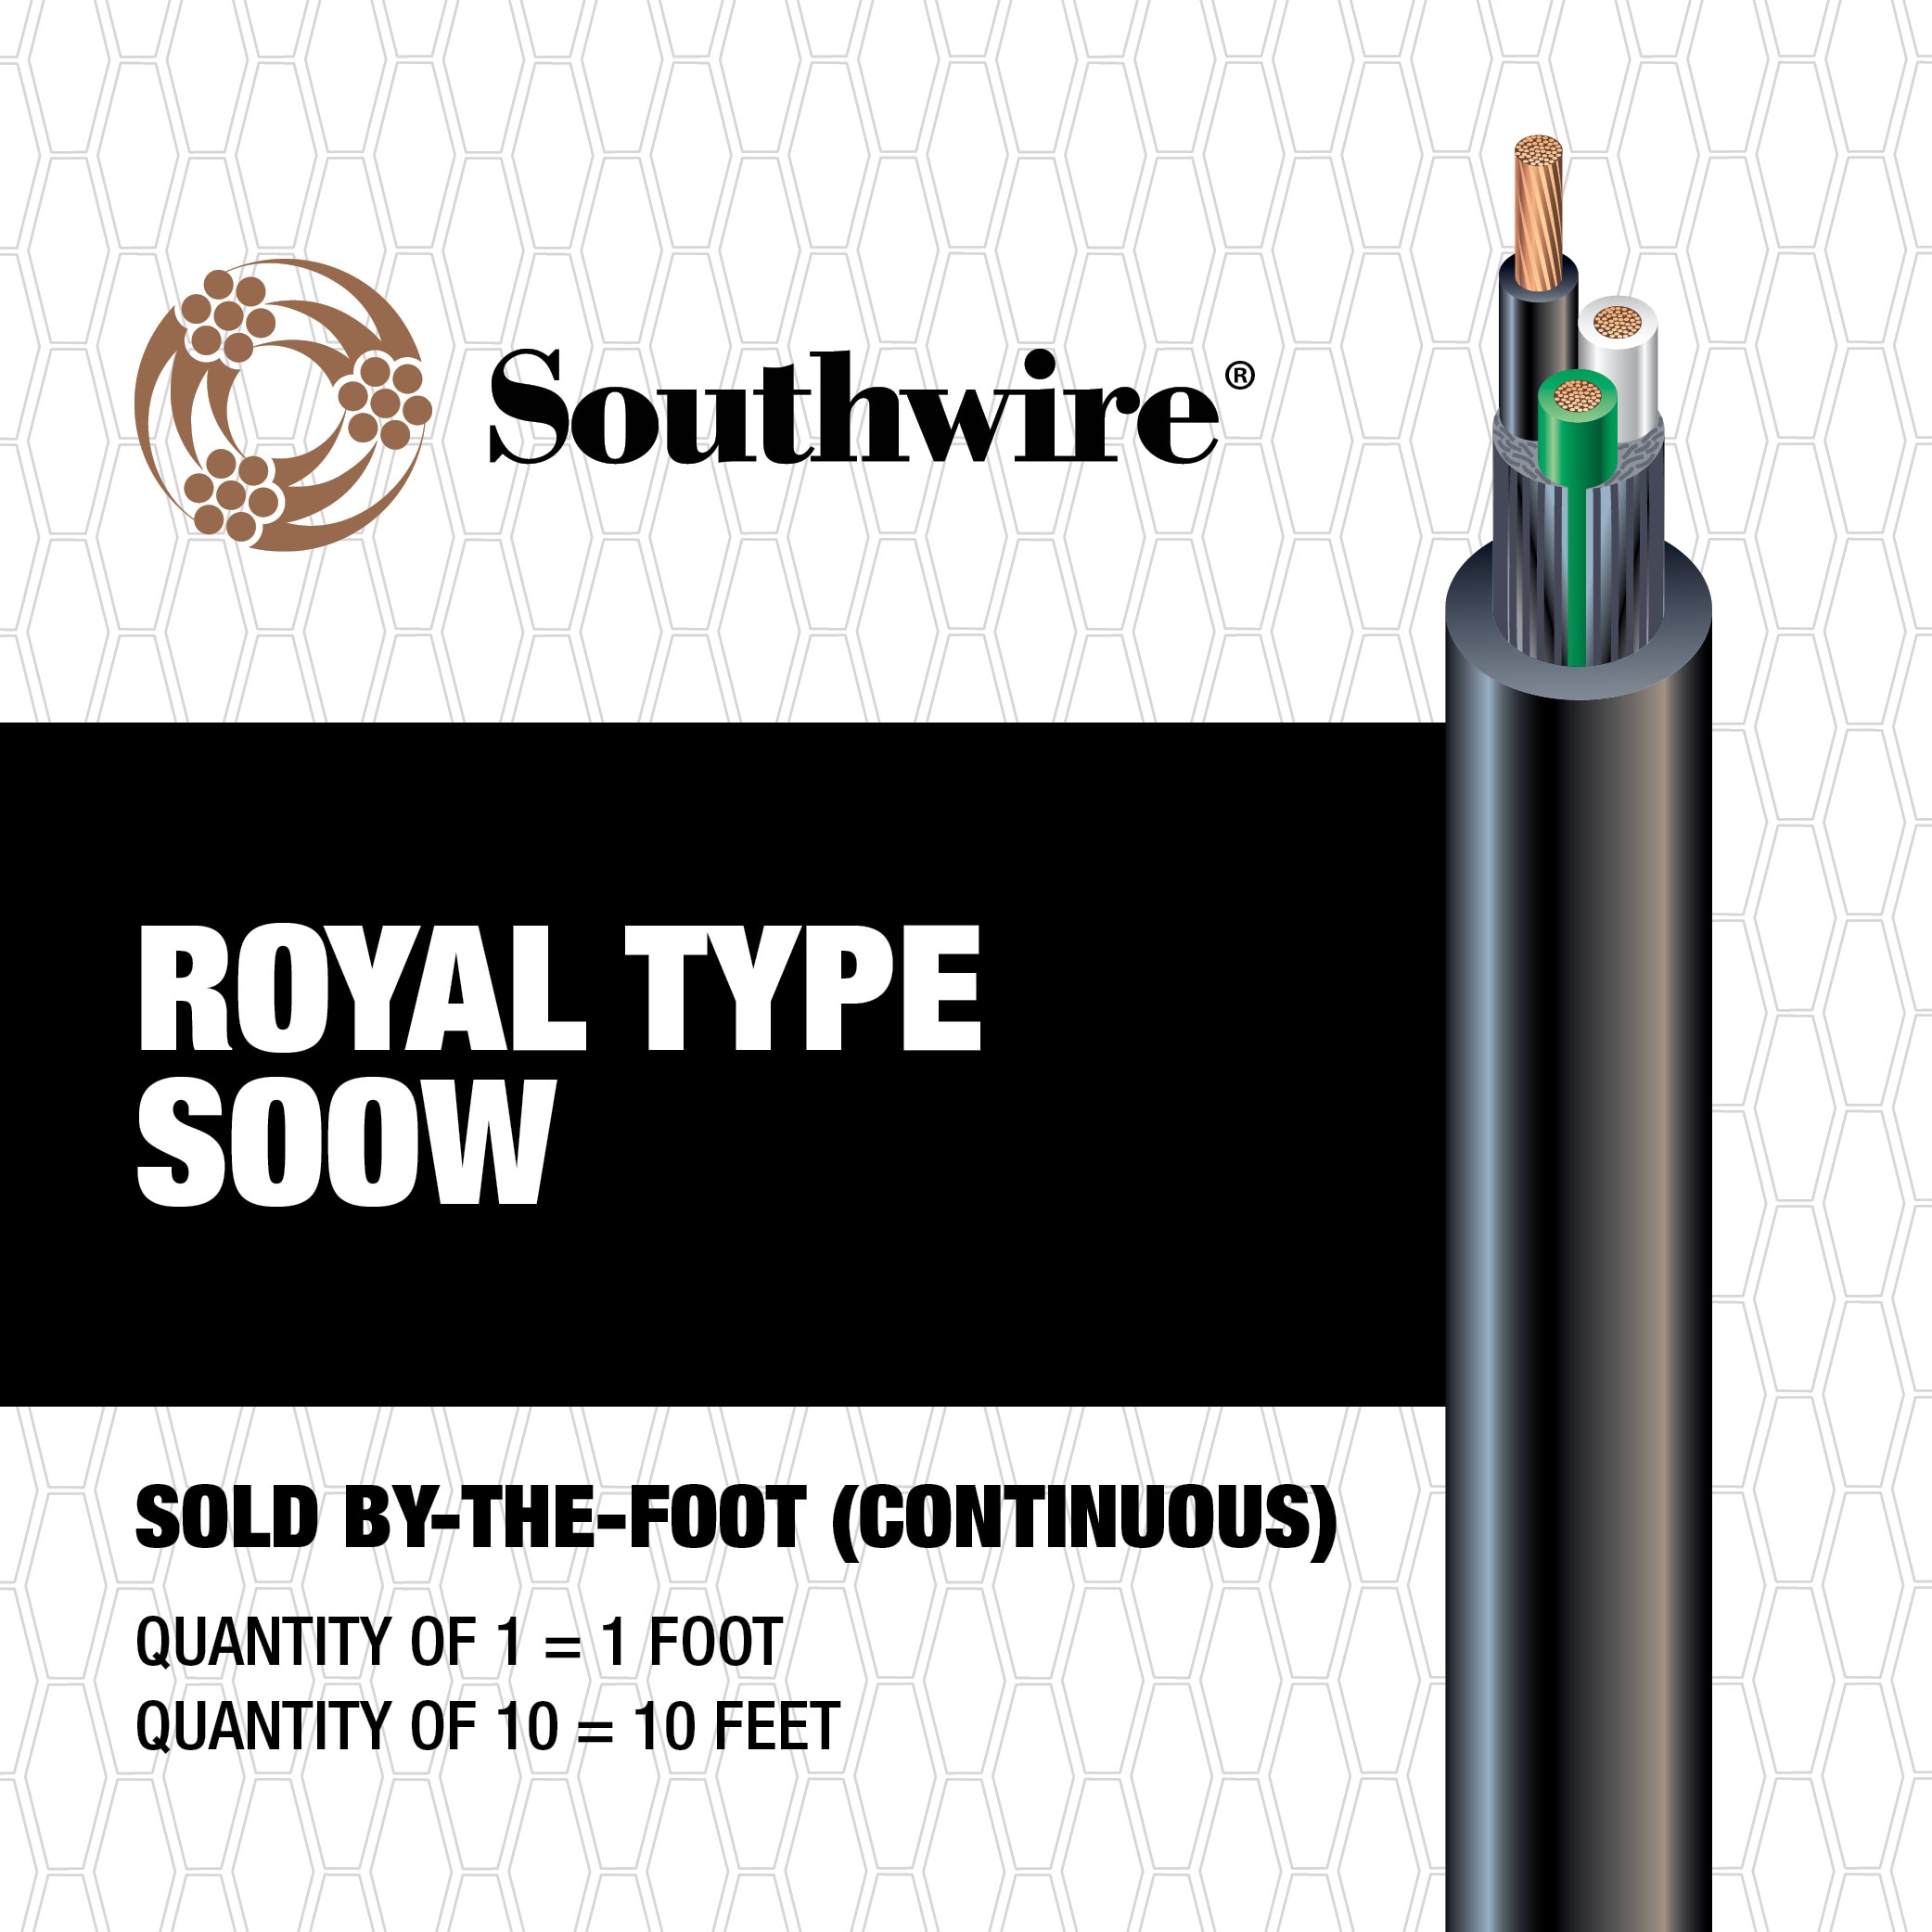 SOOW 10/3 Bulk Cable - SOOW Jacket, 30 Amps, 3 Wire, 600v - Water